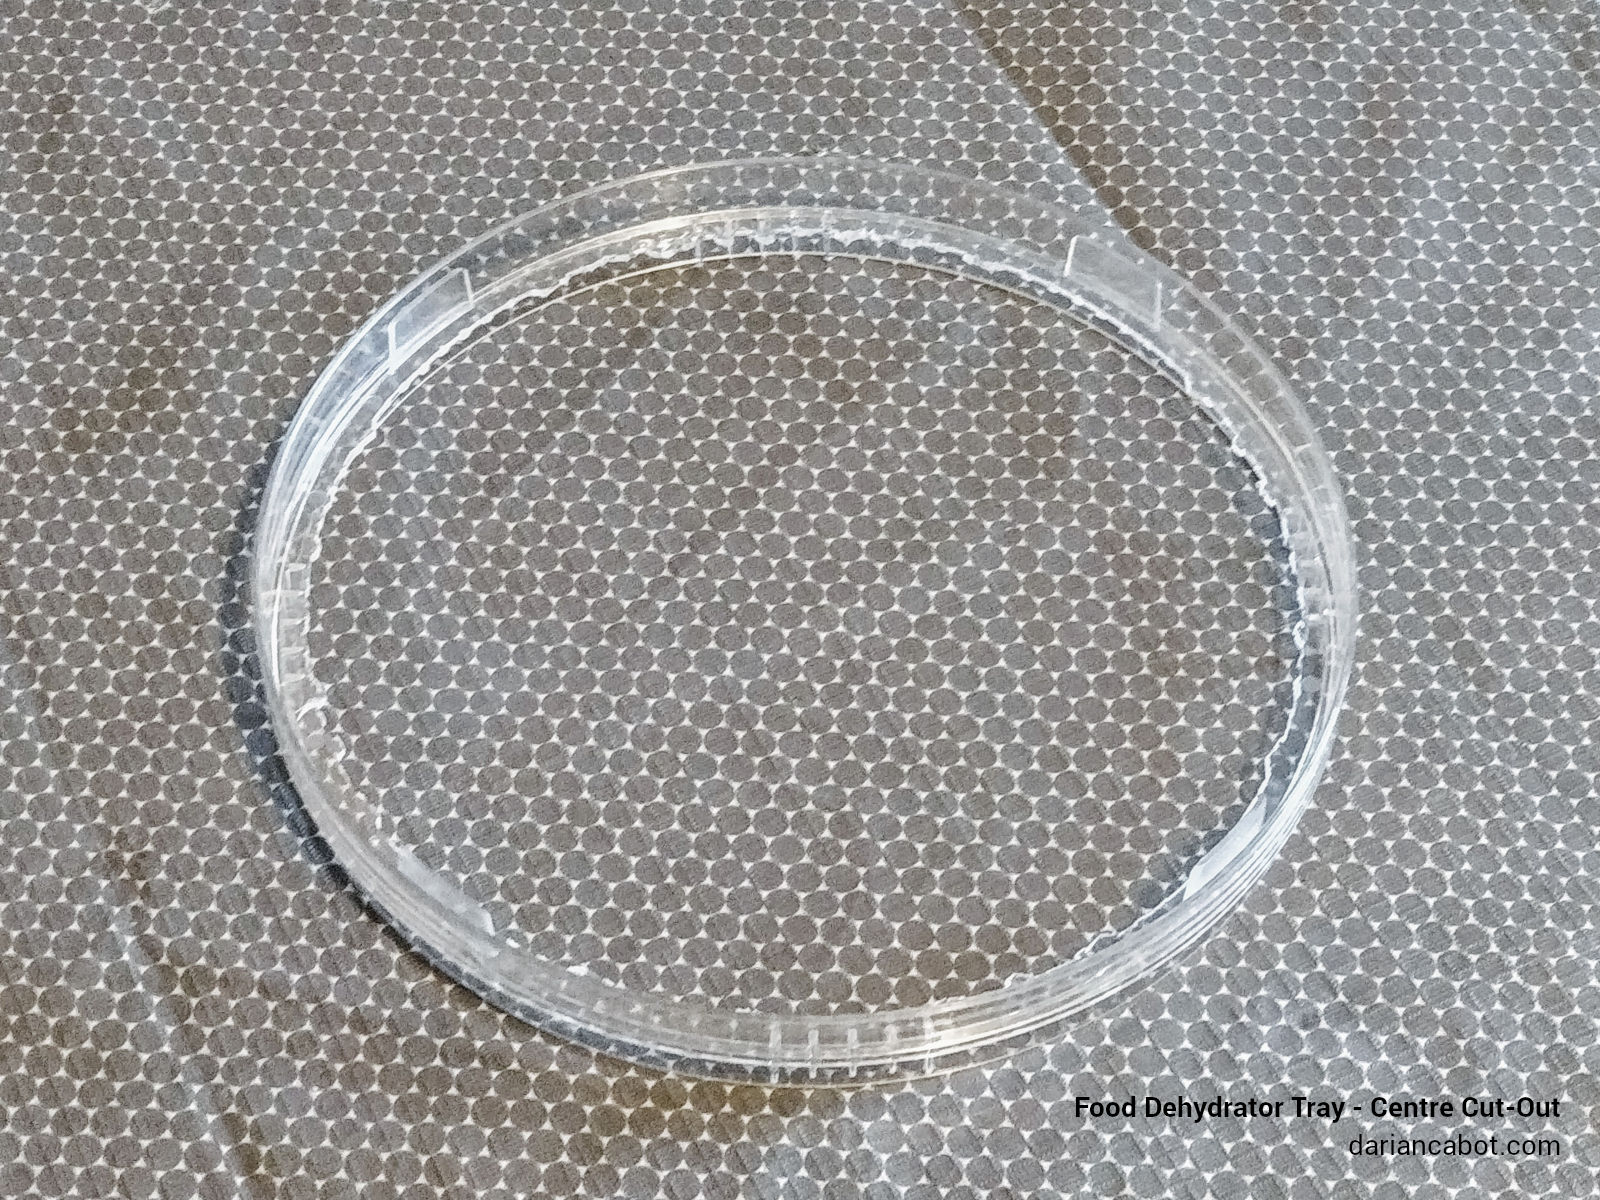 Filament Dryer Tray - Centre Cut-Out